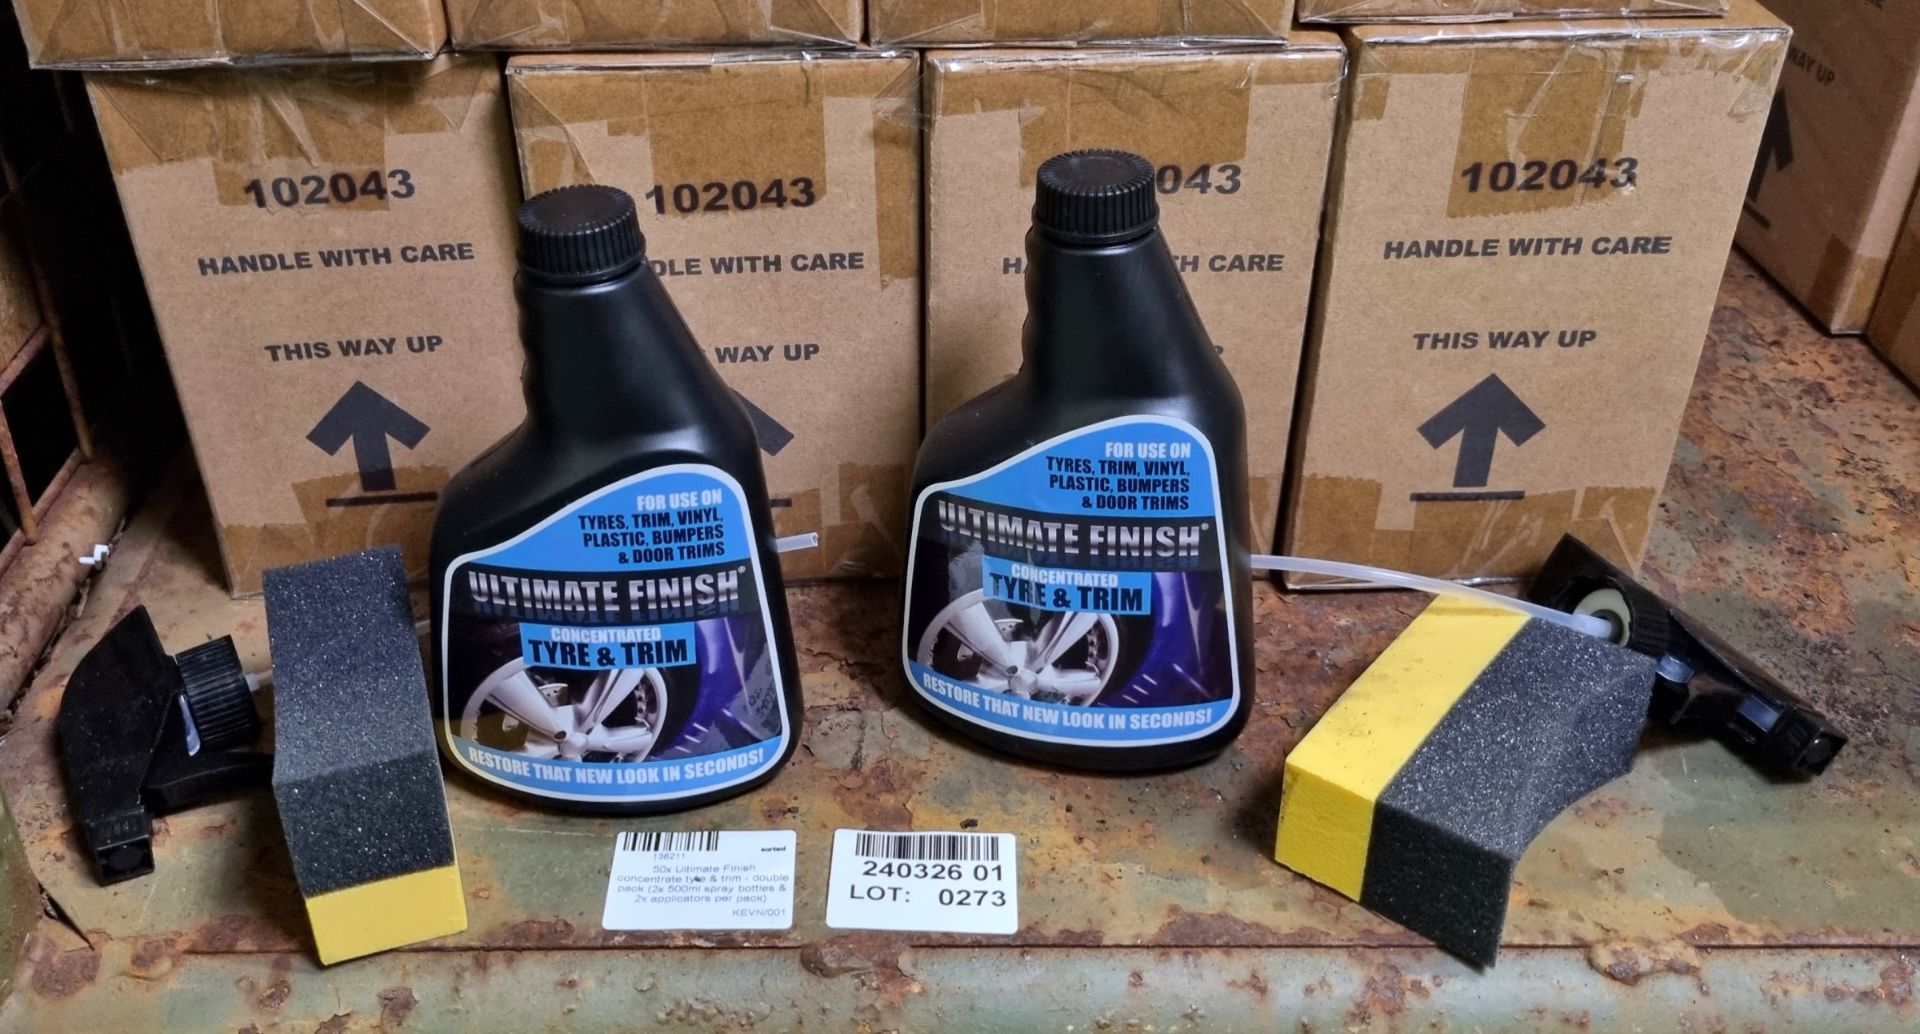 50x Ultimate Finish concentrate tyre & trim - double packs - 2x 500ml spray bottles & 2x applicators - Image 5 of 6